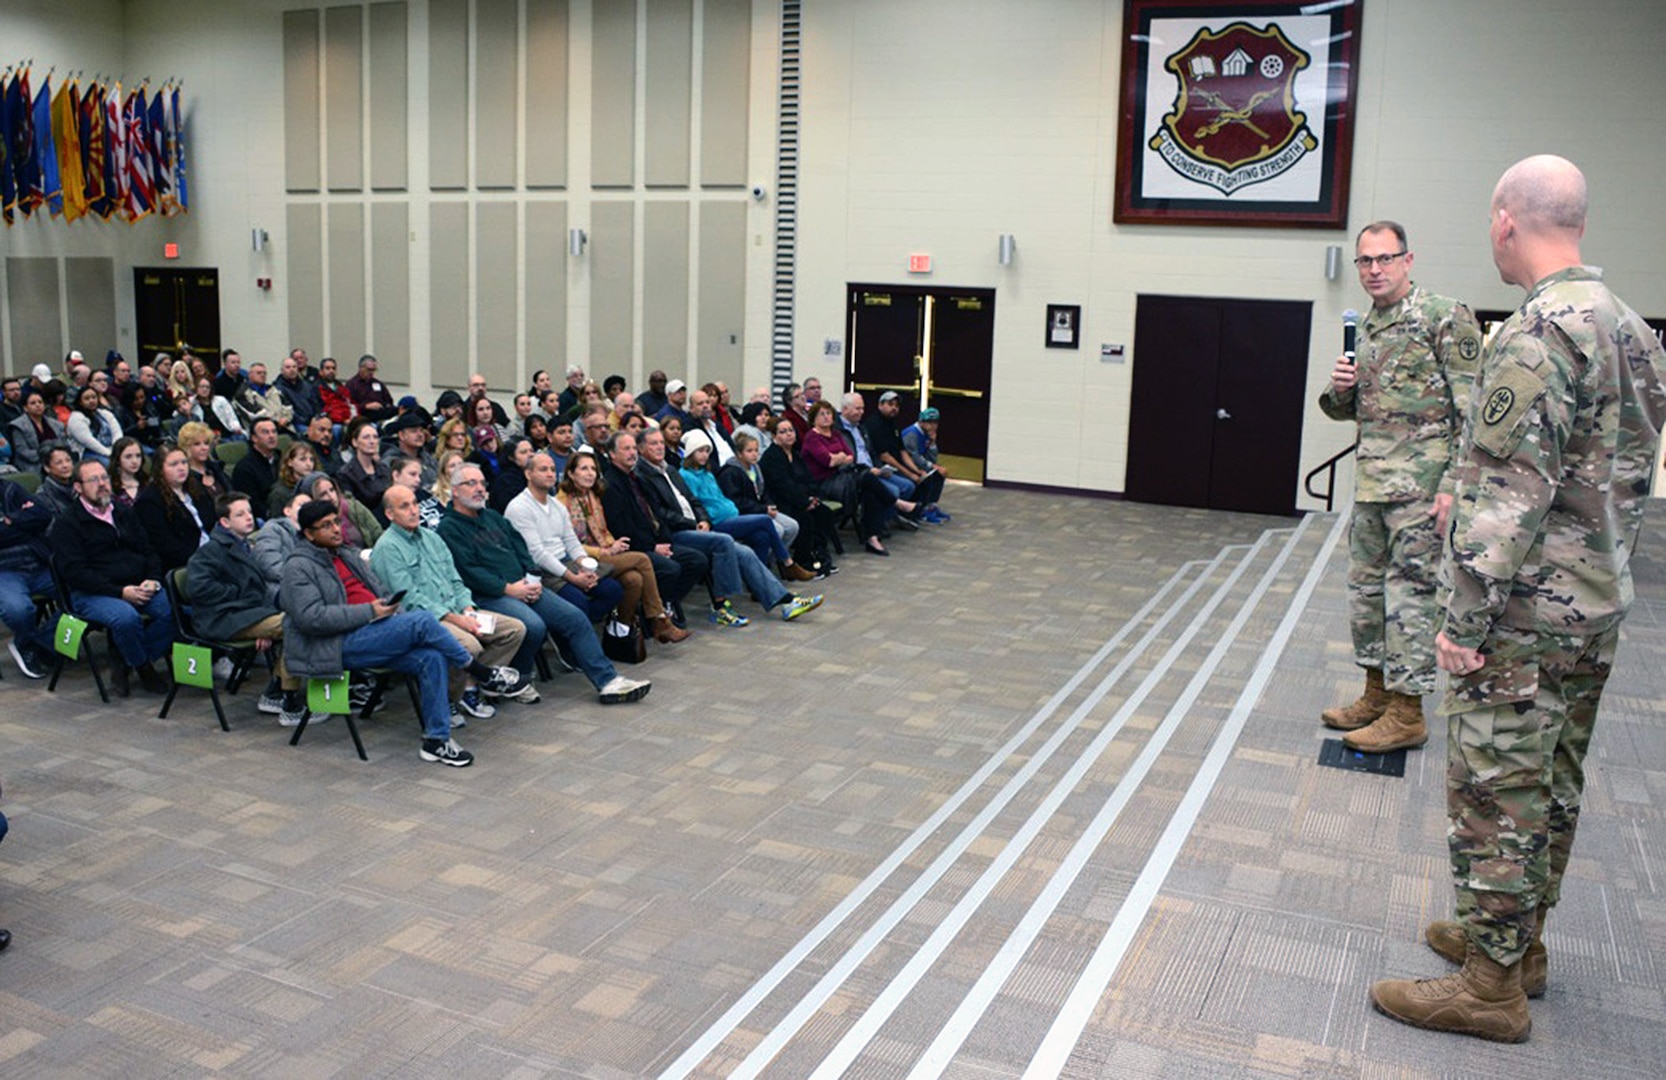 Maj. Gen. Brian C. Lein, Commanding General of the Army Medical Department Center & School at Joint Base San Antonio-Fort Sam Houston, and Command Sgt. Maj. Buck O’Neal kick off Mission Thanksgiving by welcoming families Nov. 23.